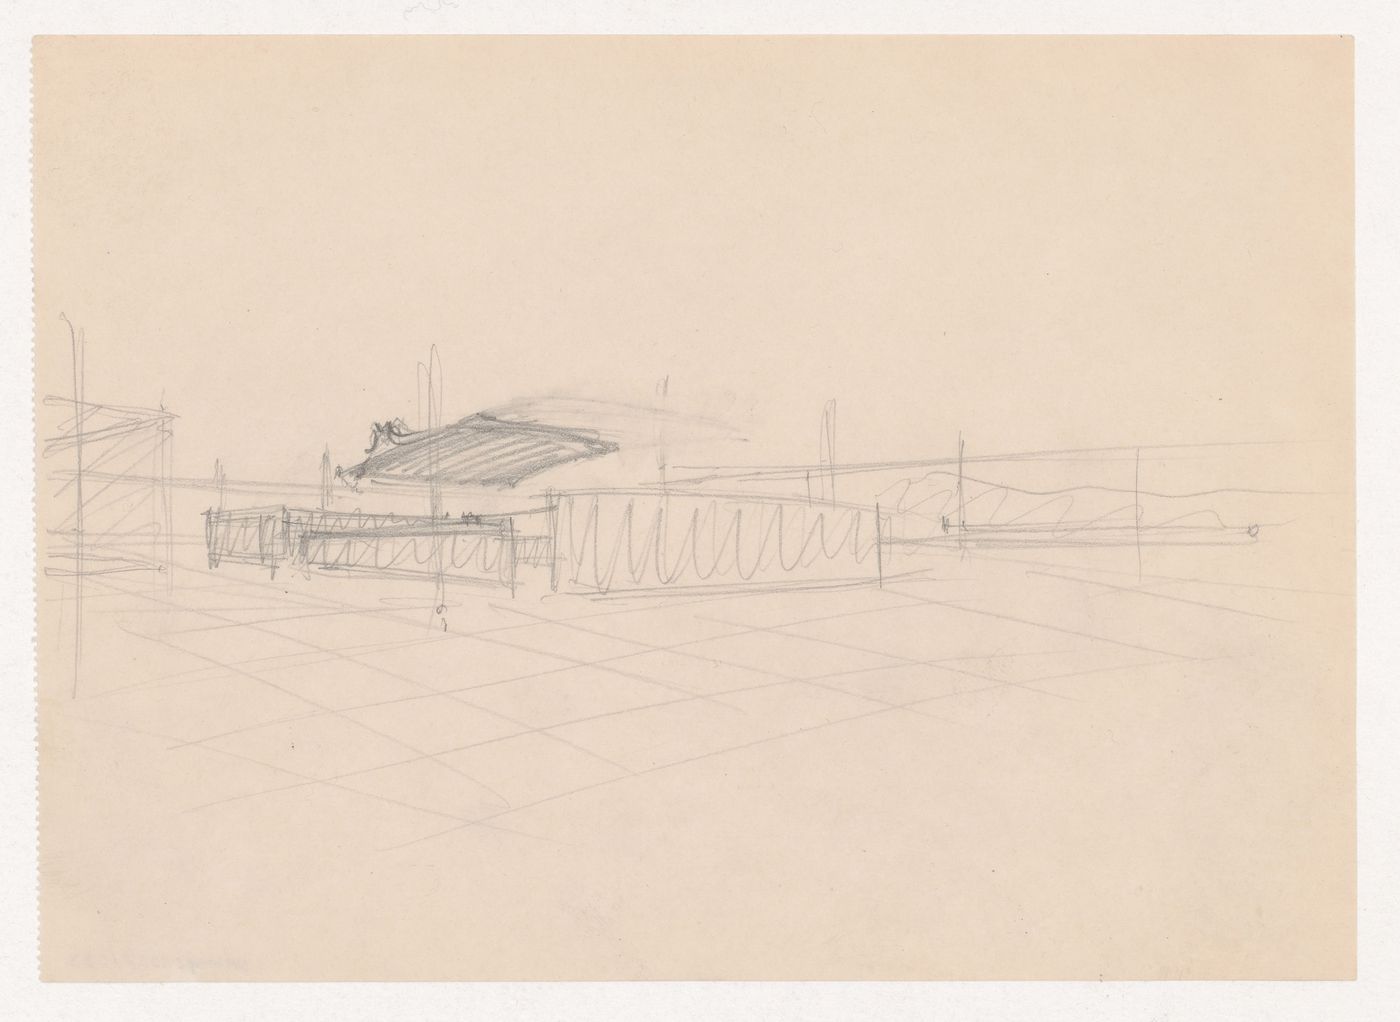 Interior perspective sketch for Museum for a Small City showing the auditorium with suspended ceiling